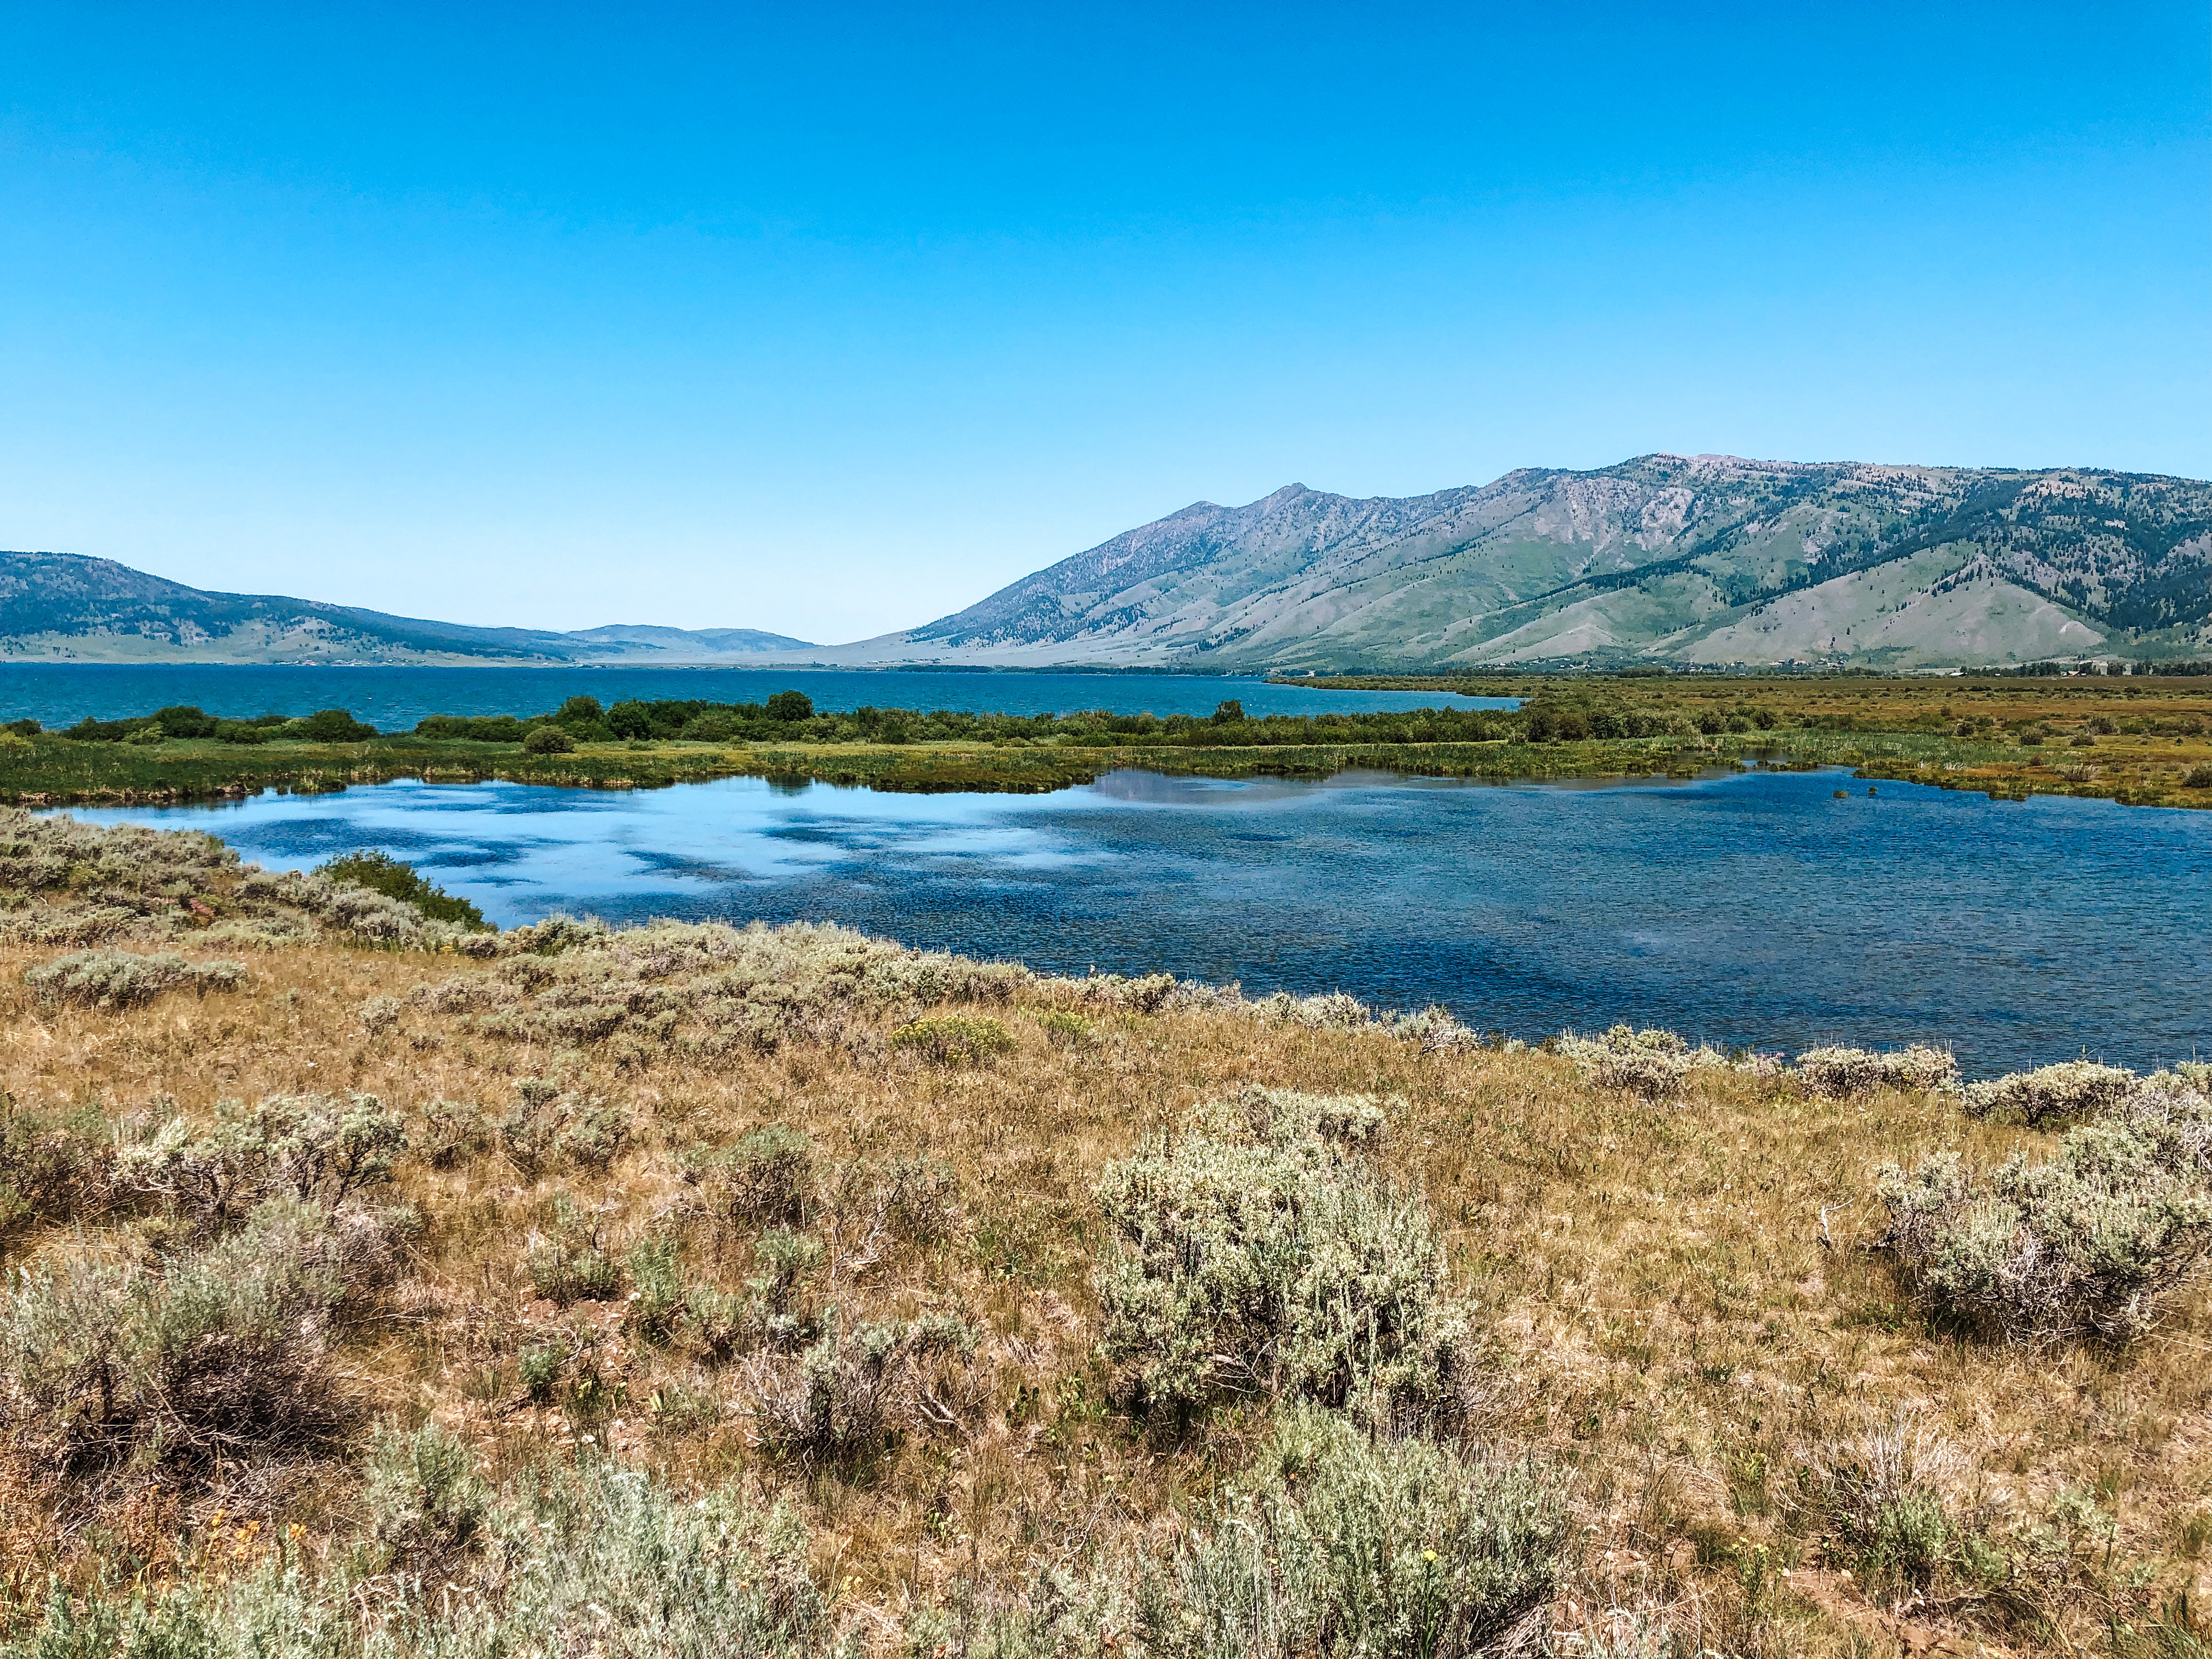 A wide-angle view of Henrys Lake at the inlet to the lake, from hiking trails that lead out from Idaho's Henrys Lake State Park. Reeds and other marshland vegetation grows in the foreground, and the Targhee National Forest and mountain range are visible in the distance.